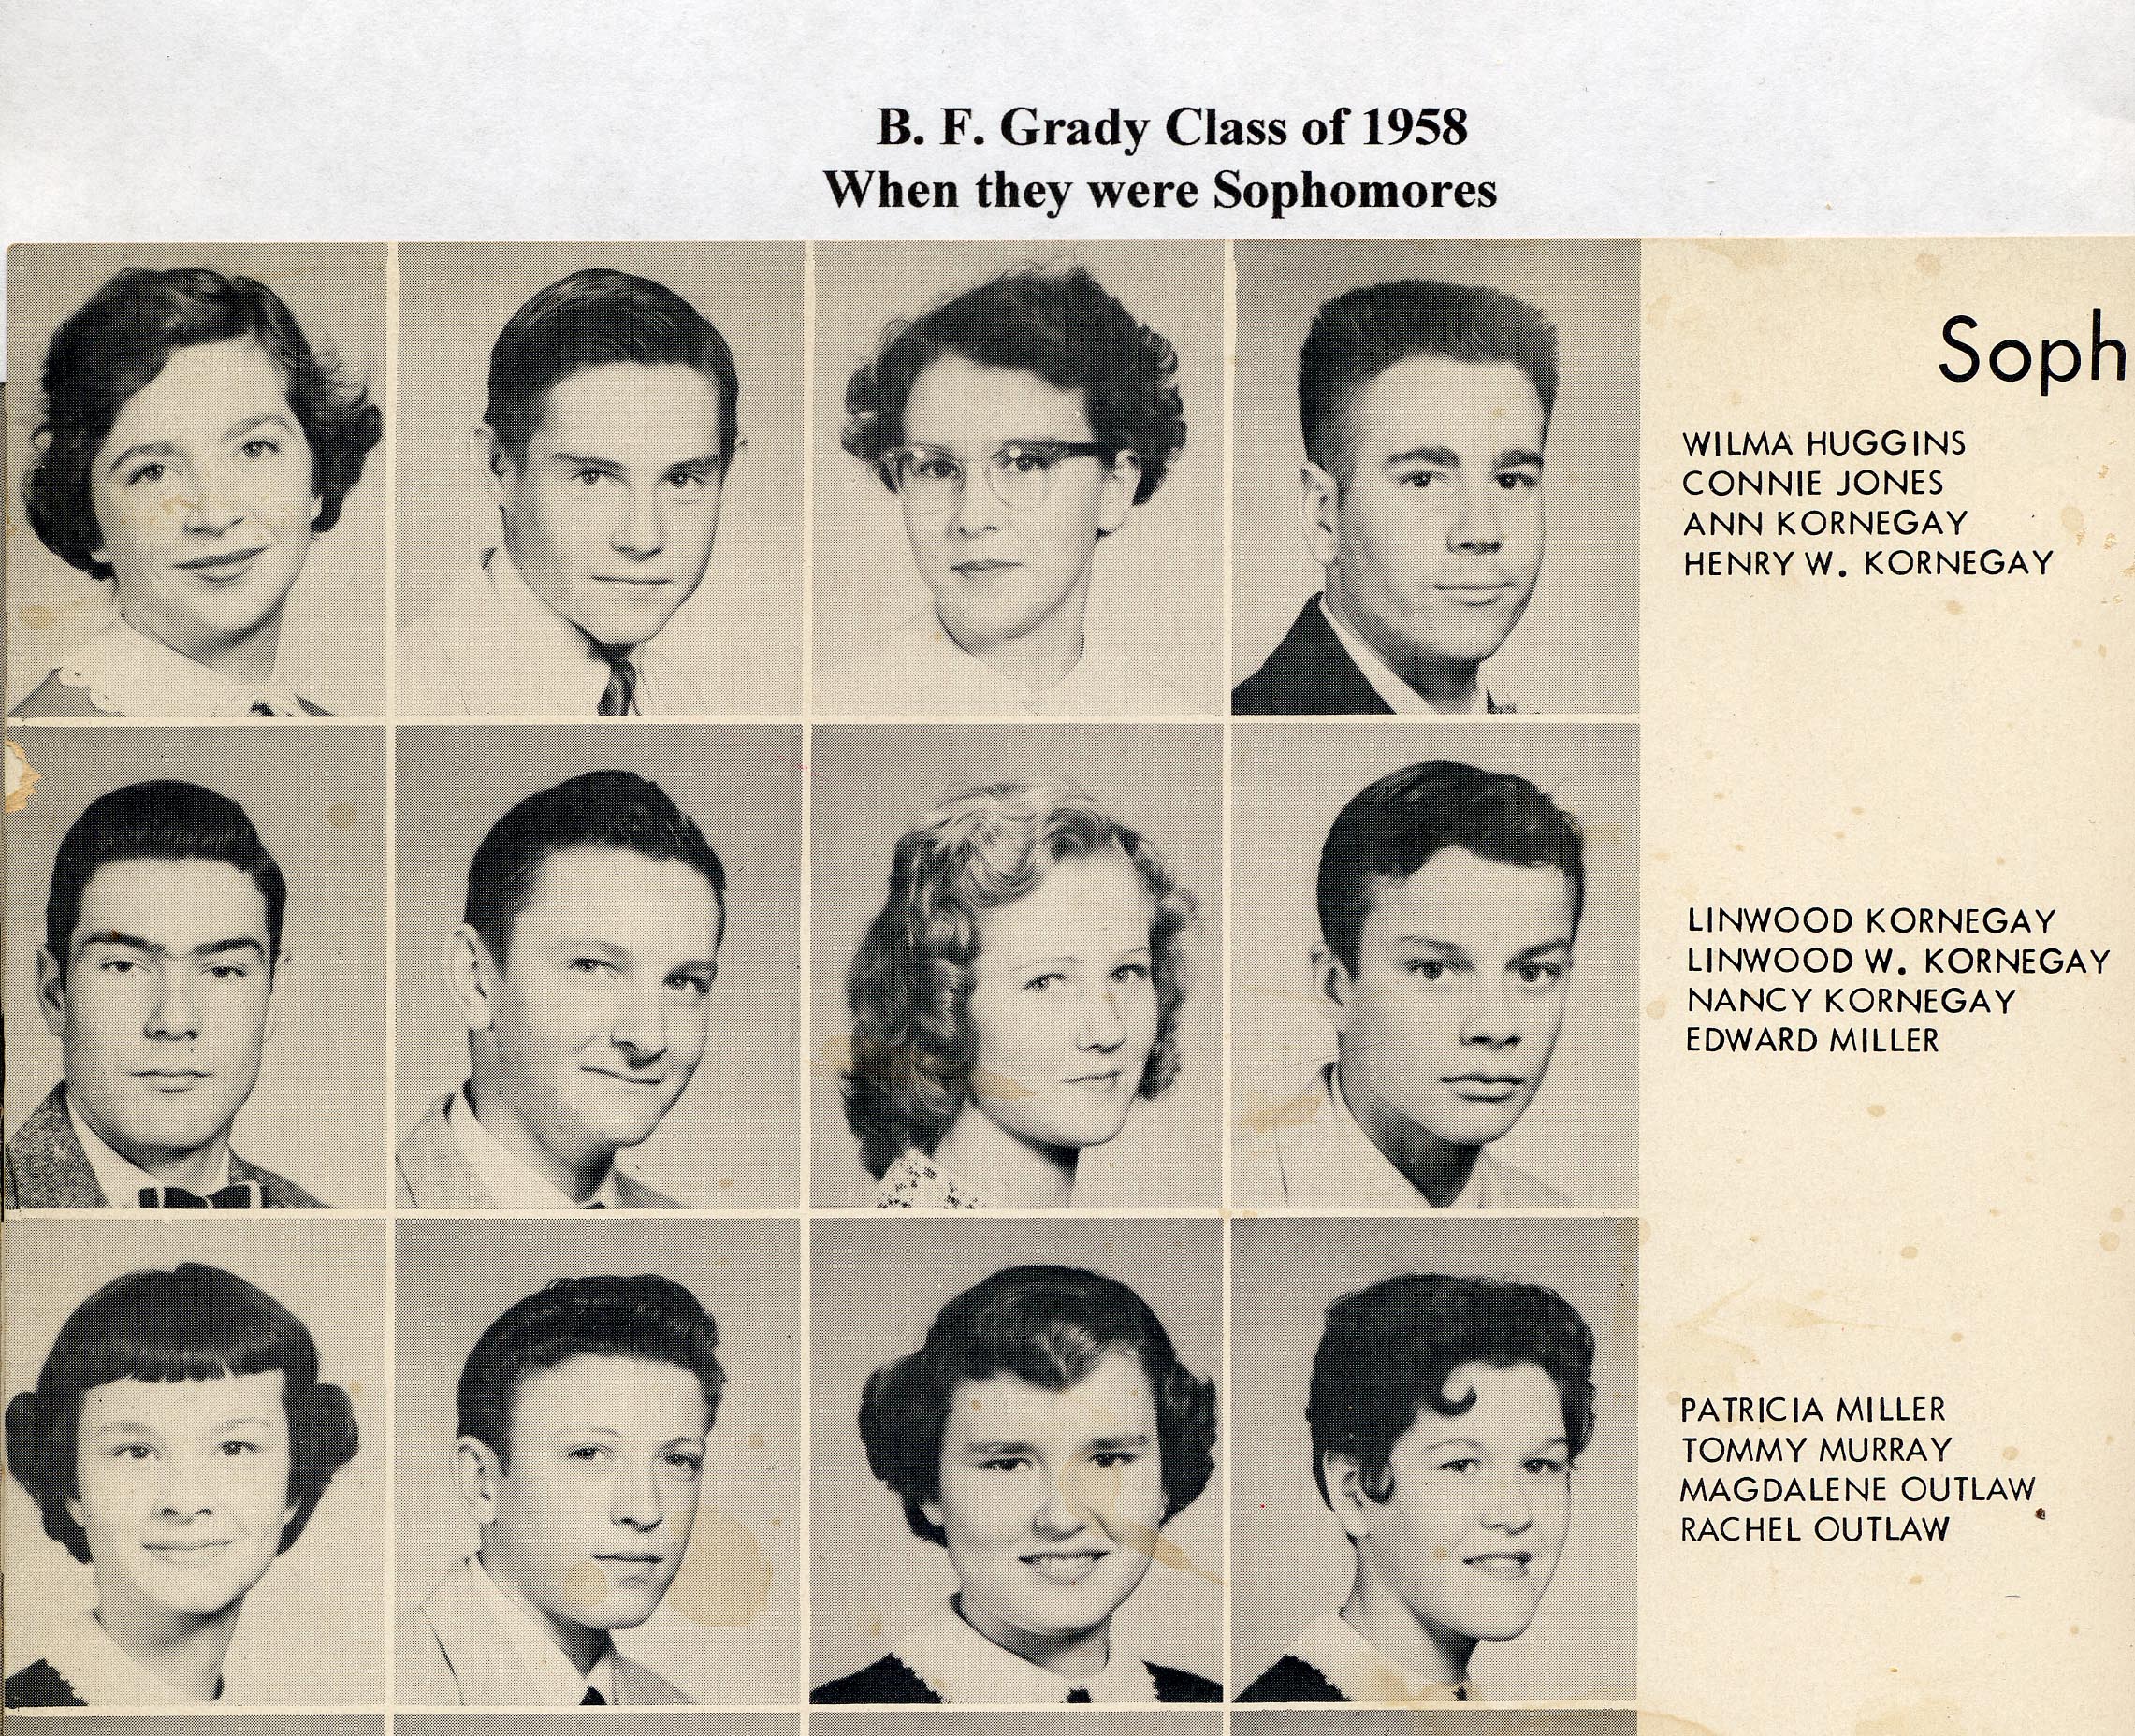 BFG Class of 1958 as Sopho p 3